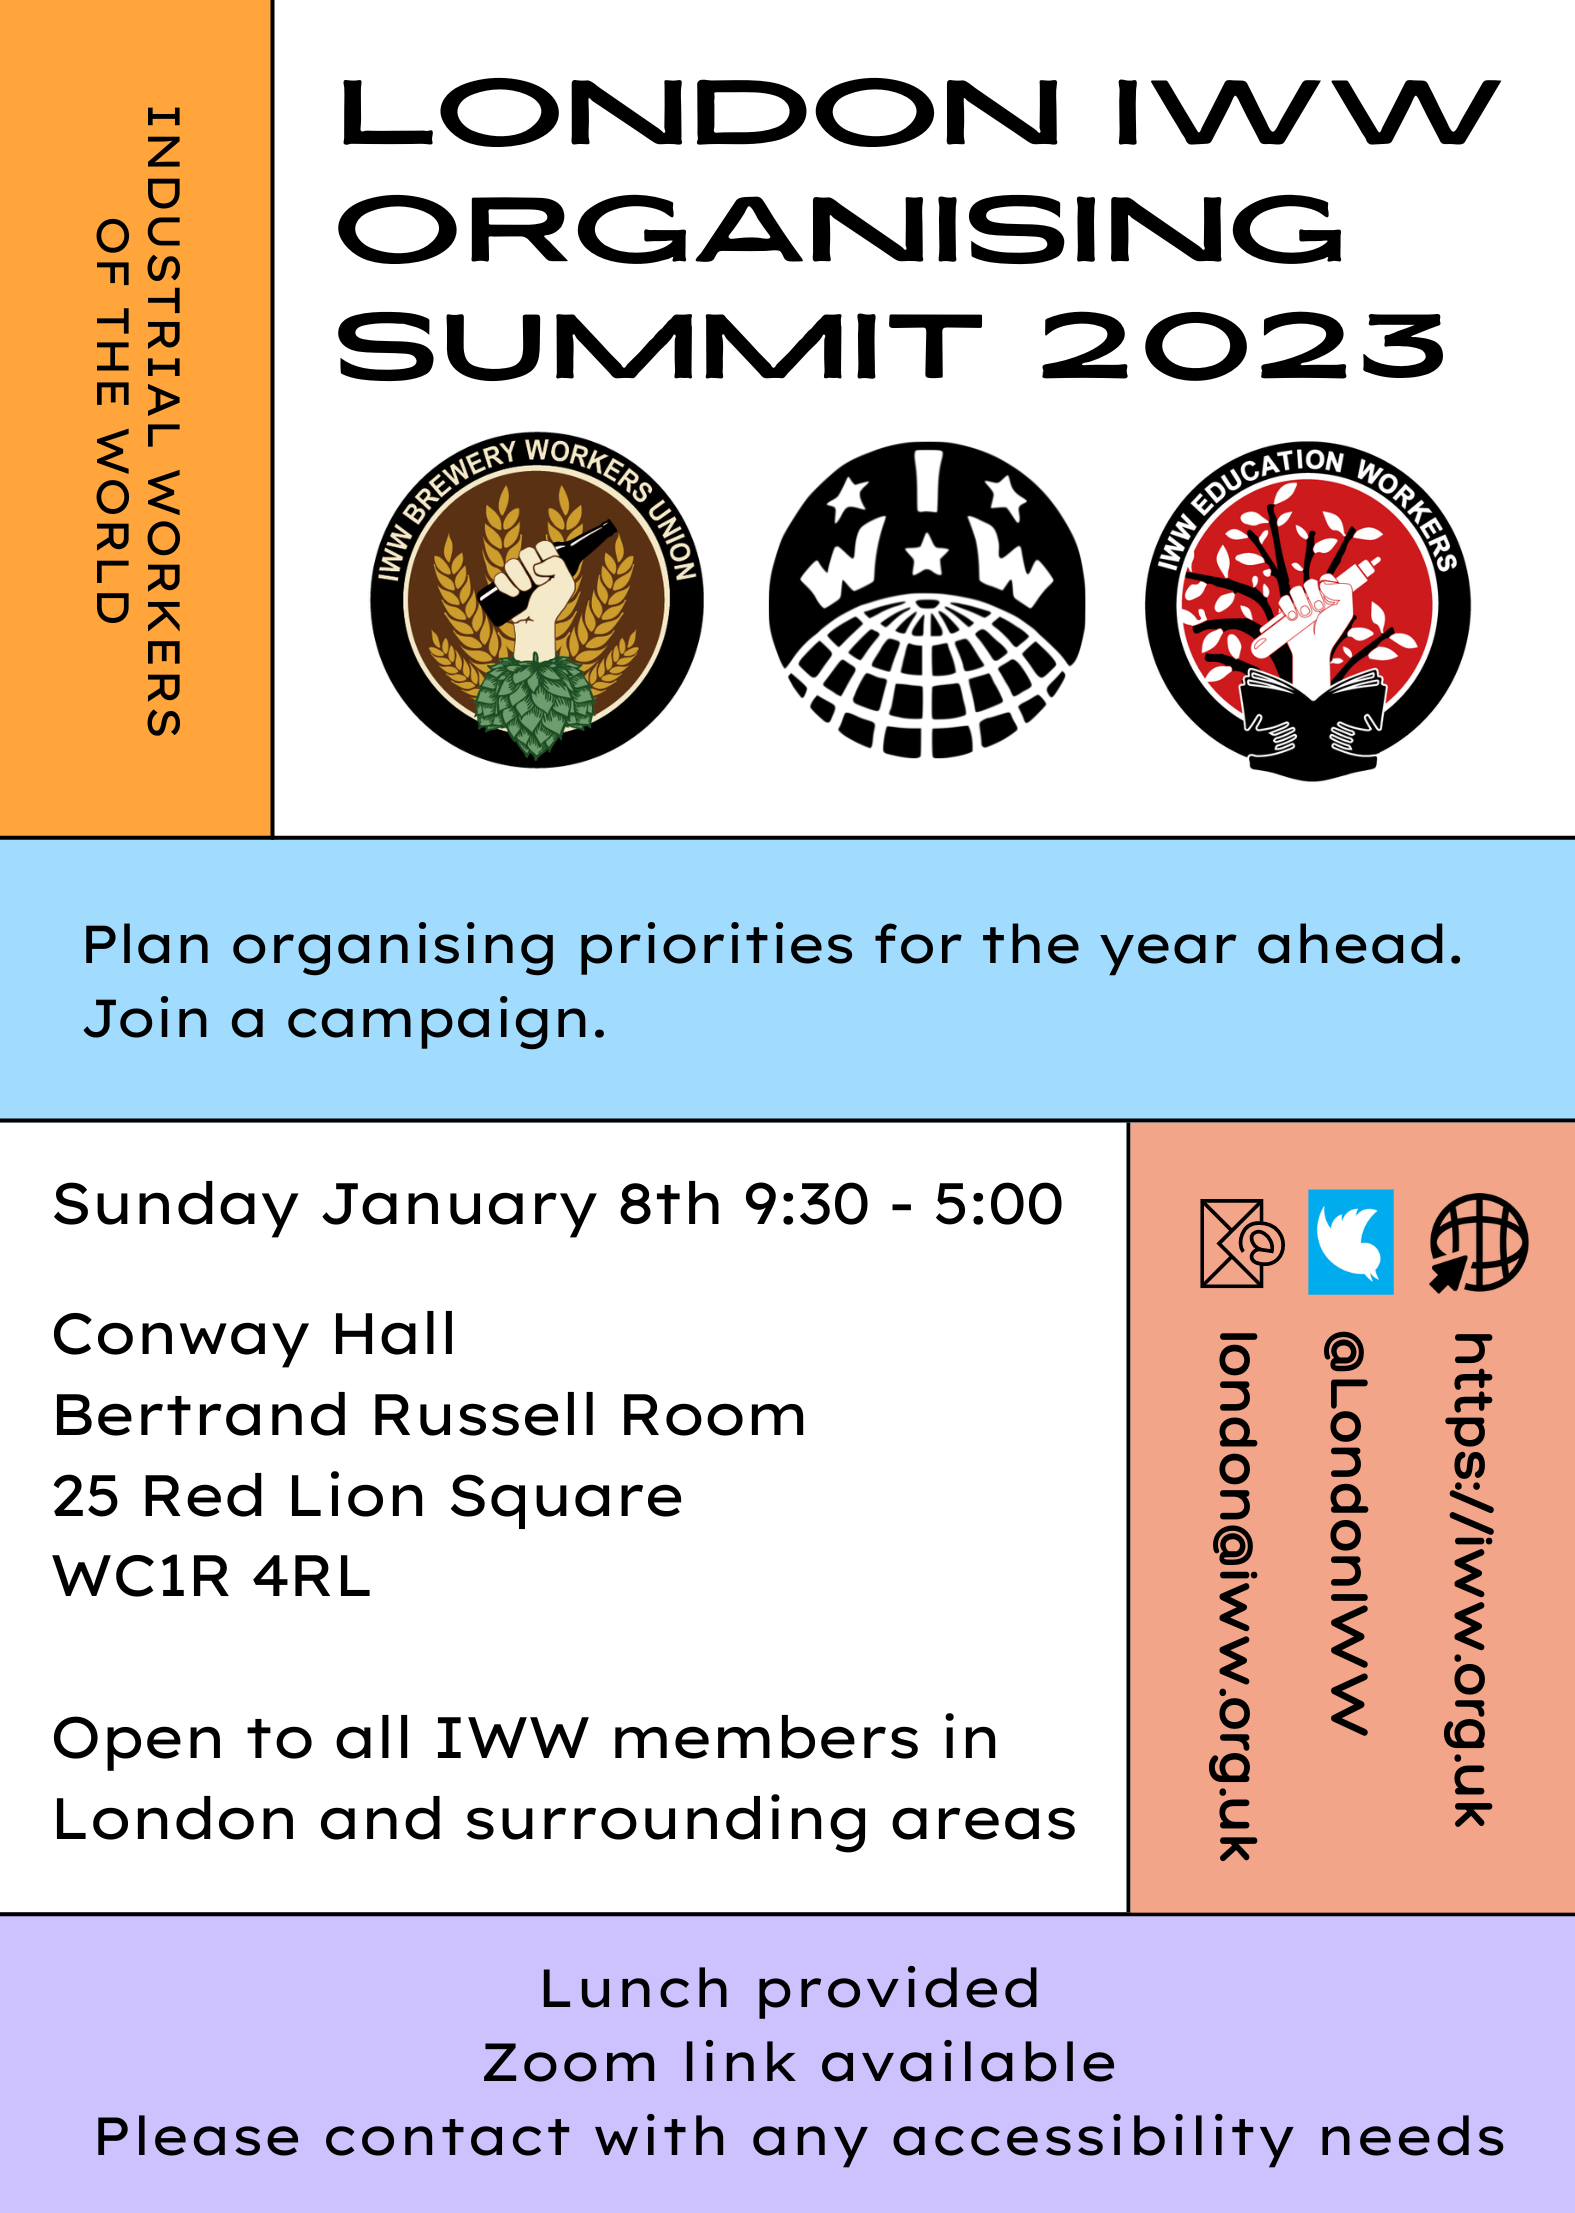 Image shows a stylised graphic reading: London IWW organising Summit 2022 Plan organising priorities for the year ahead. Join a campaign. Sunday January 8th 9:30 - 5:00 Conway Hall Bertrand Russell Room 25 Red Lion Square WC1R 4RL Open to all IWW members in London and surrounding areas. Lunch provided Zoom link available Please contact with any accessibility needs